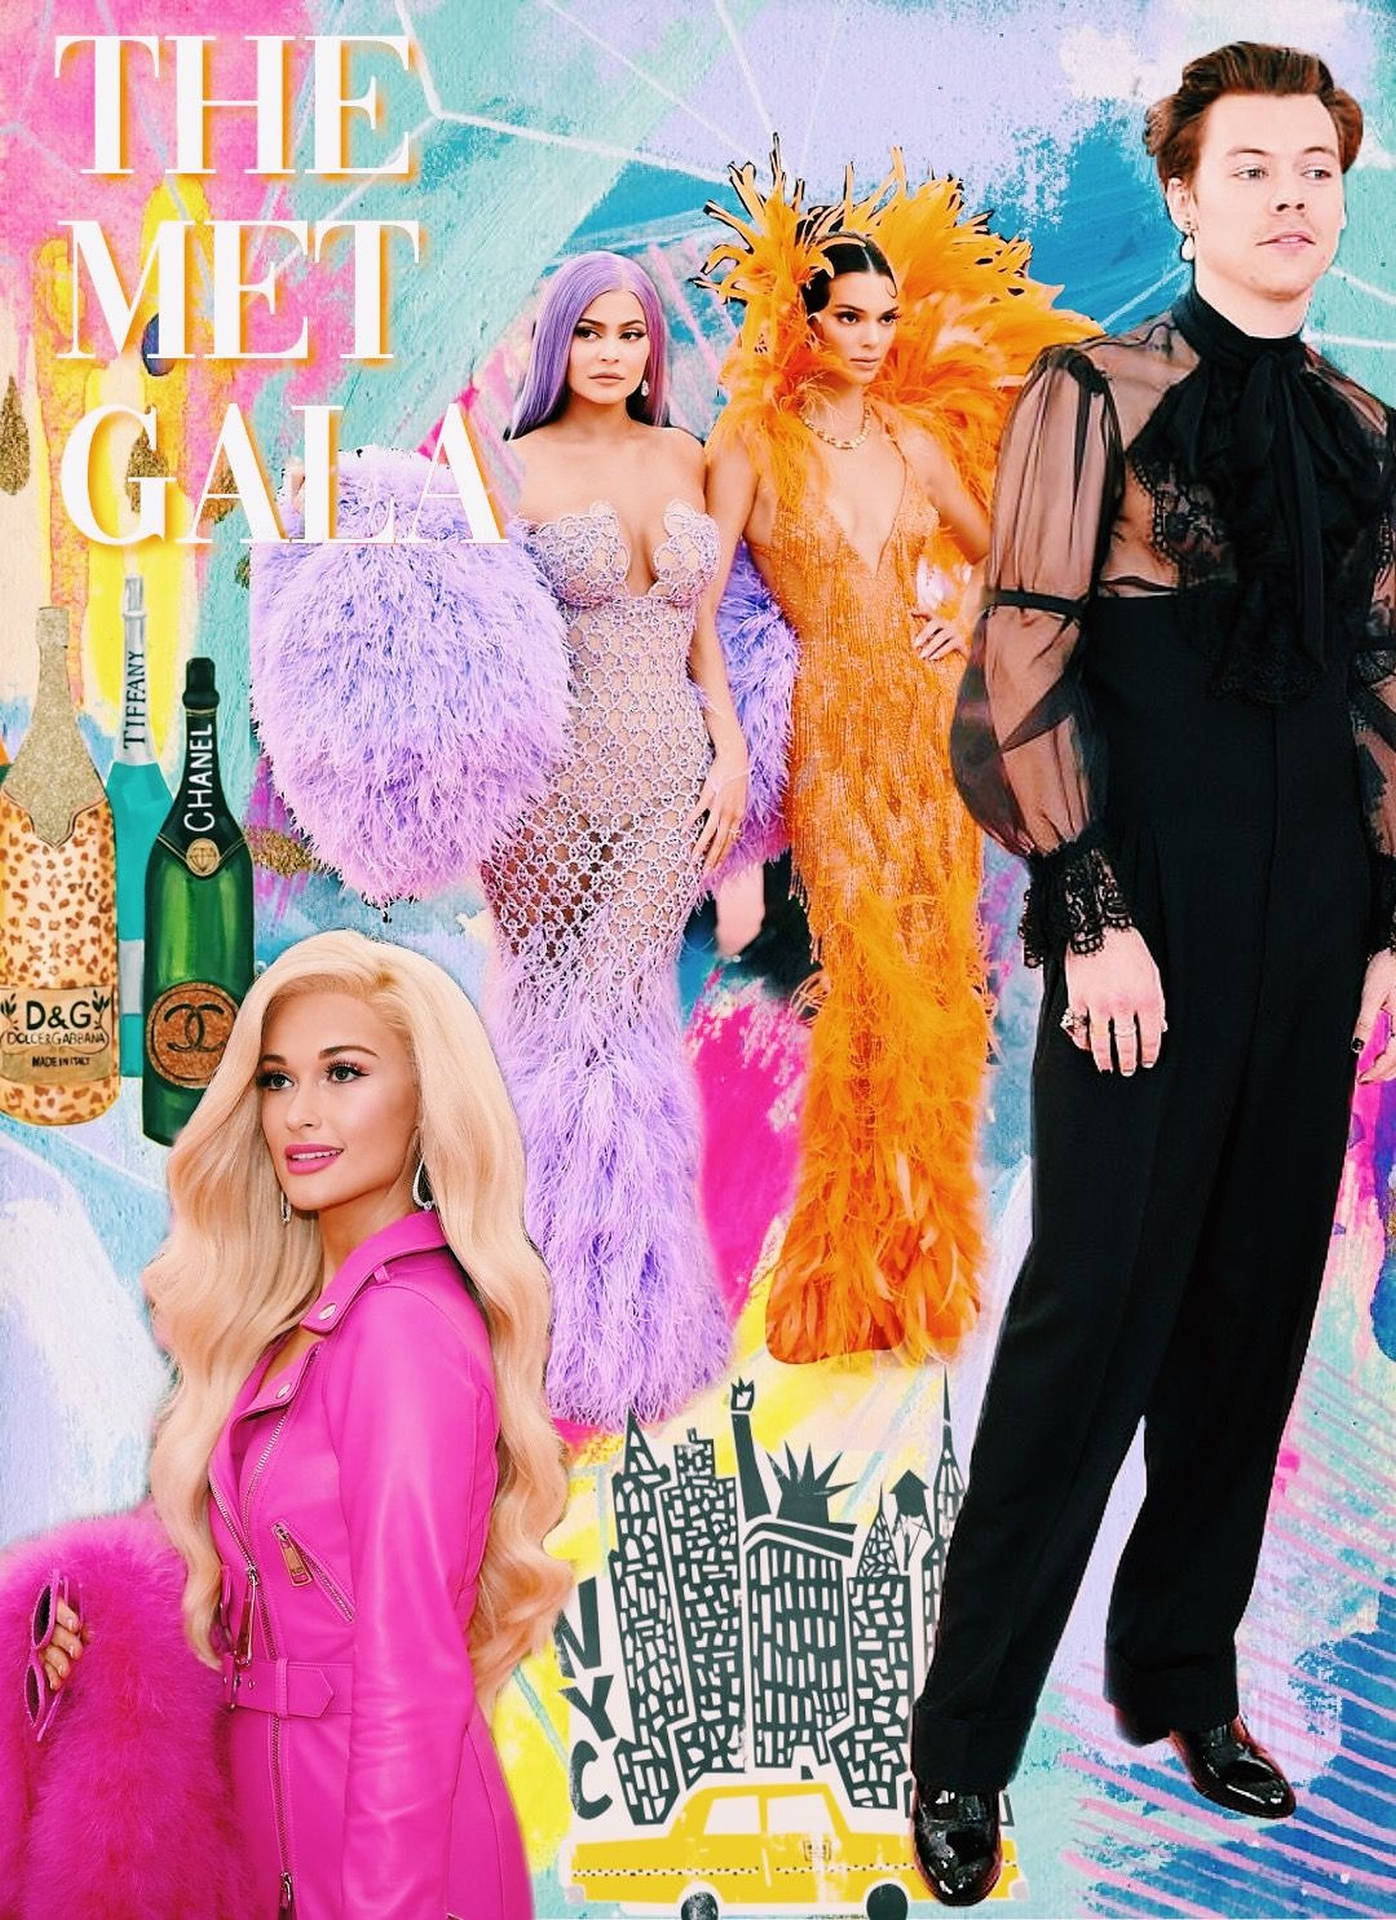 Met Gala Collage Background